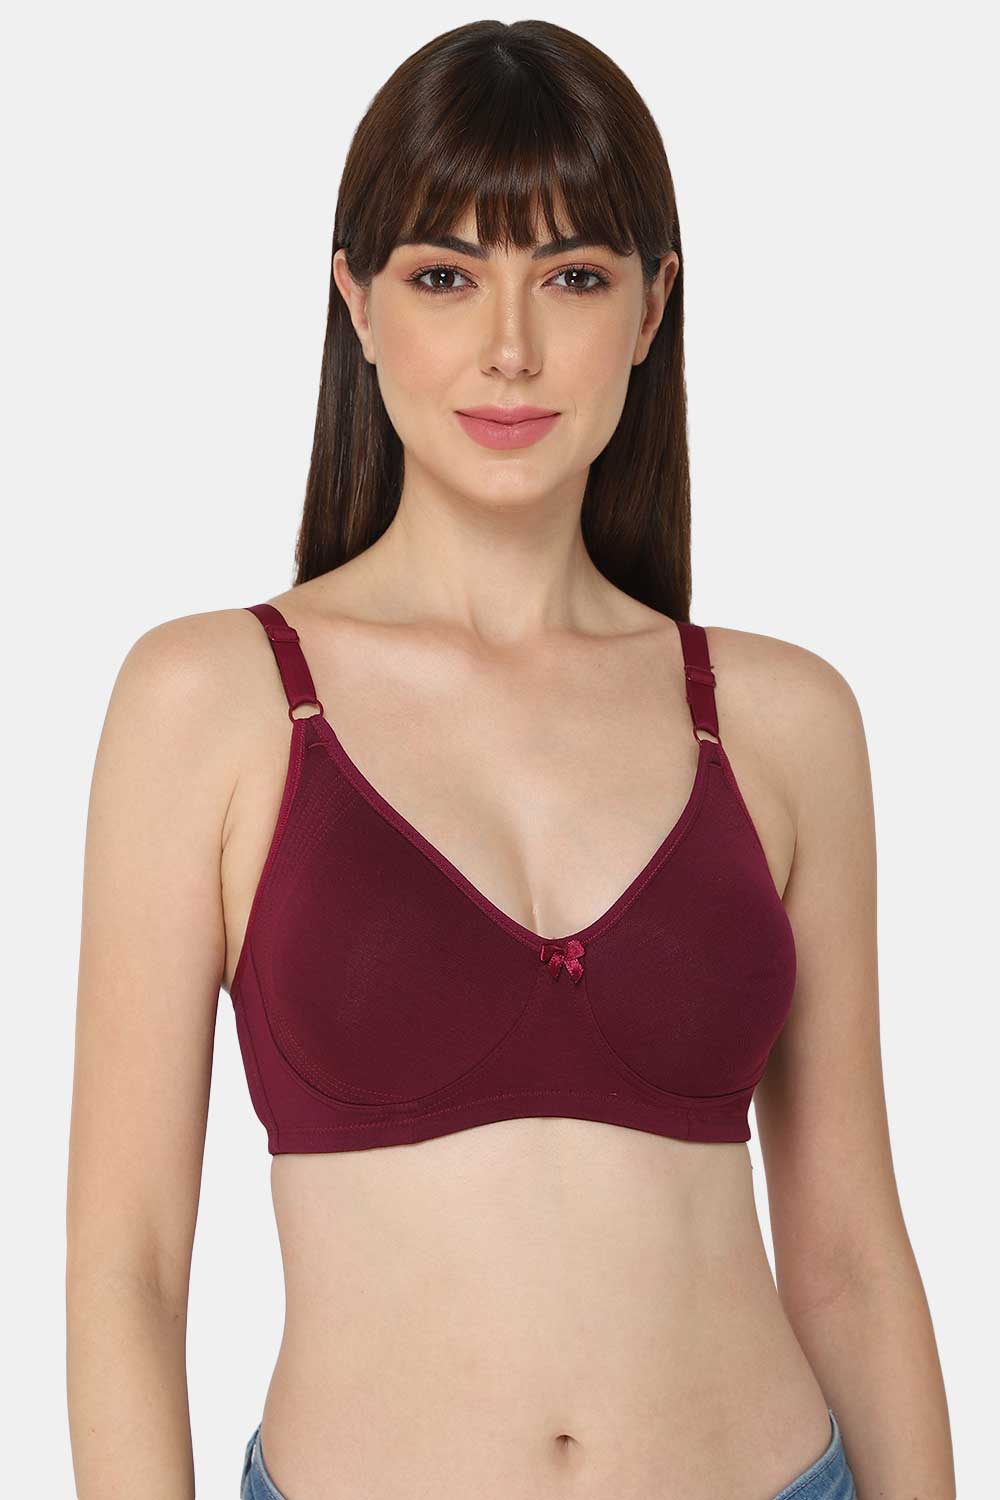 Buy INTIMACY LINGERIE Women's Cotton Brassiere, Non-Padded, Non-Wired, Full Coverage, Shaper Panel with Side Support Regular Bra, 3 Piece